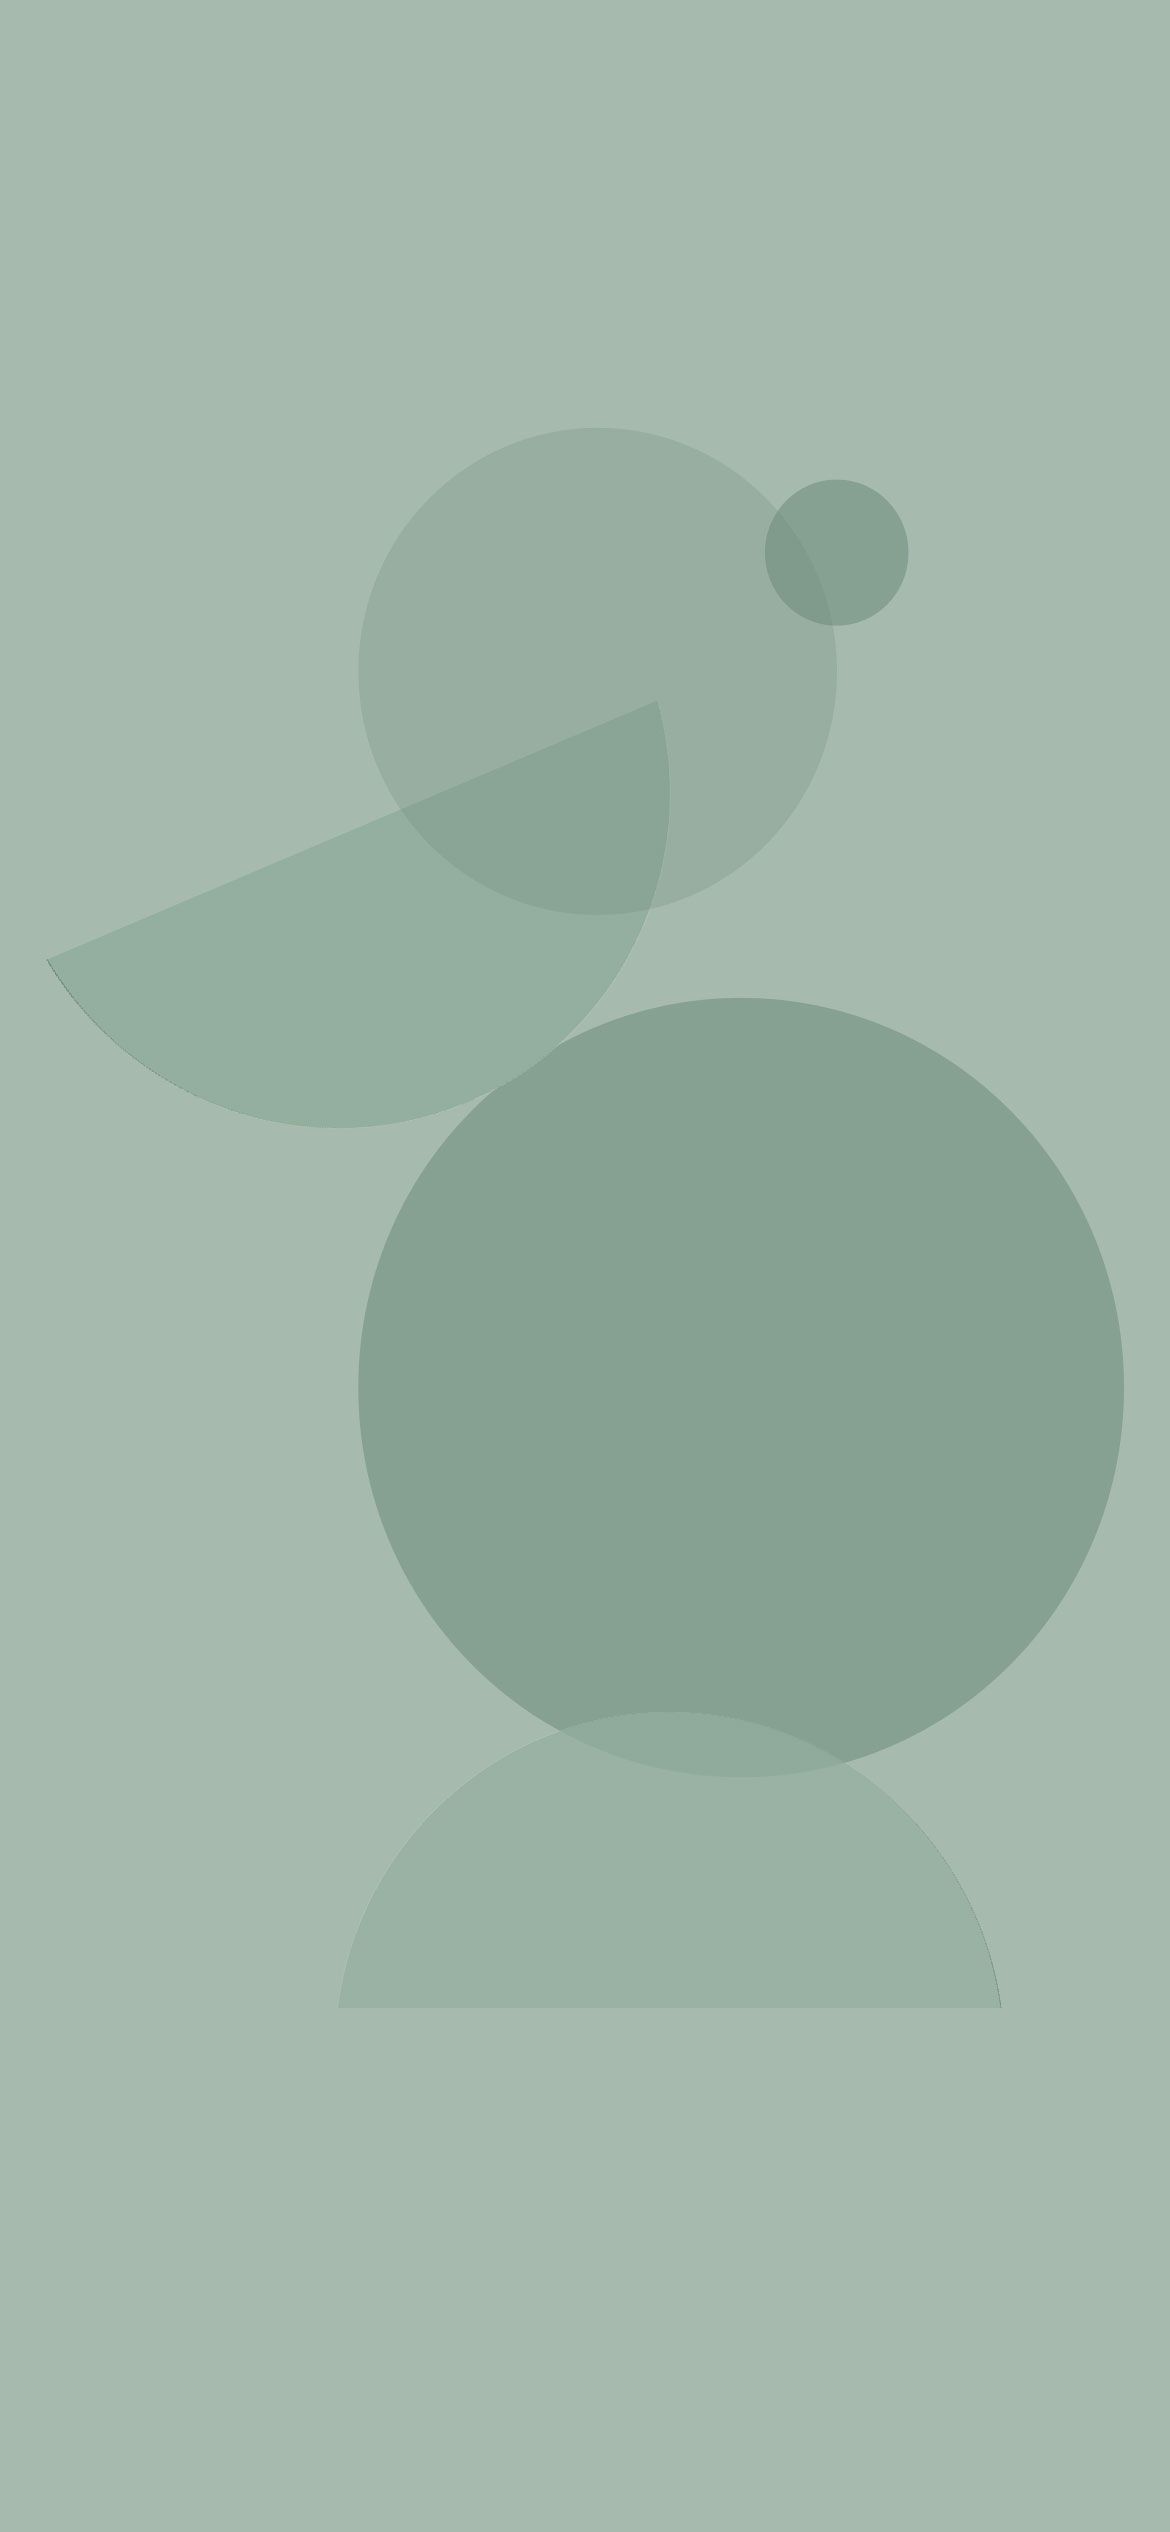 Sage Green Aesthetic Wallpaper : Modern Abstract Background iPhone Wallpaper